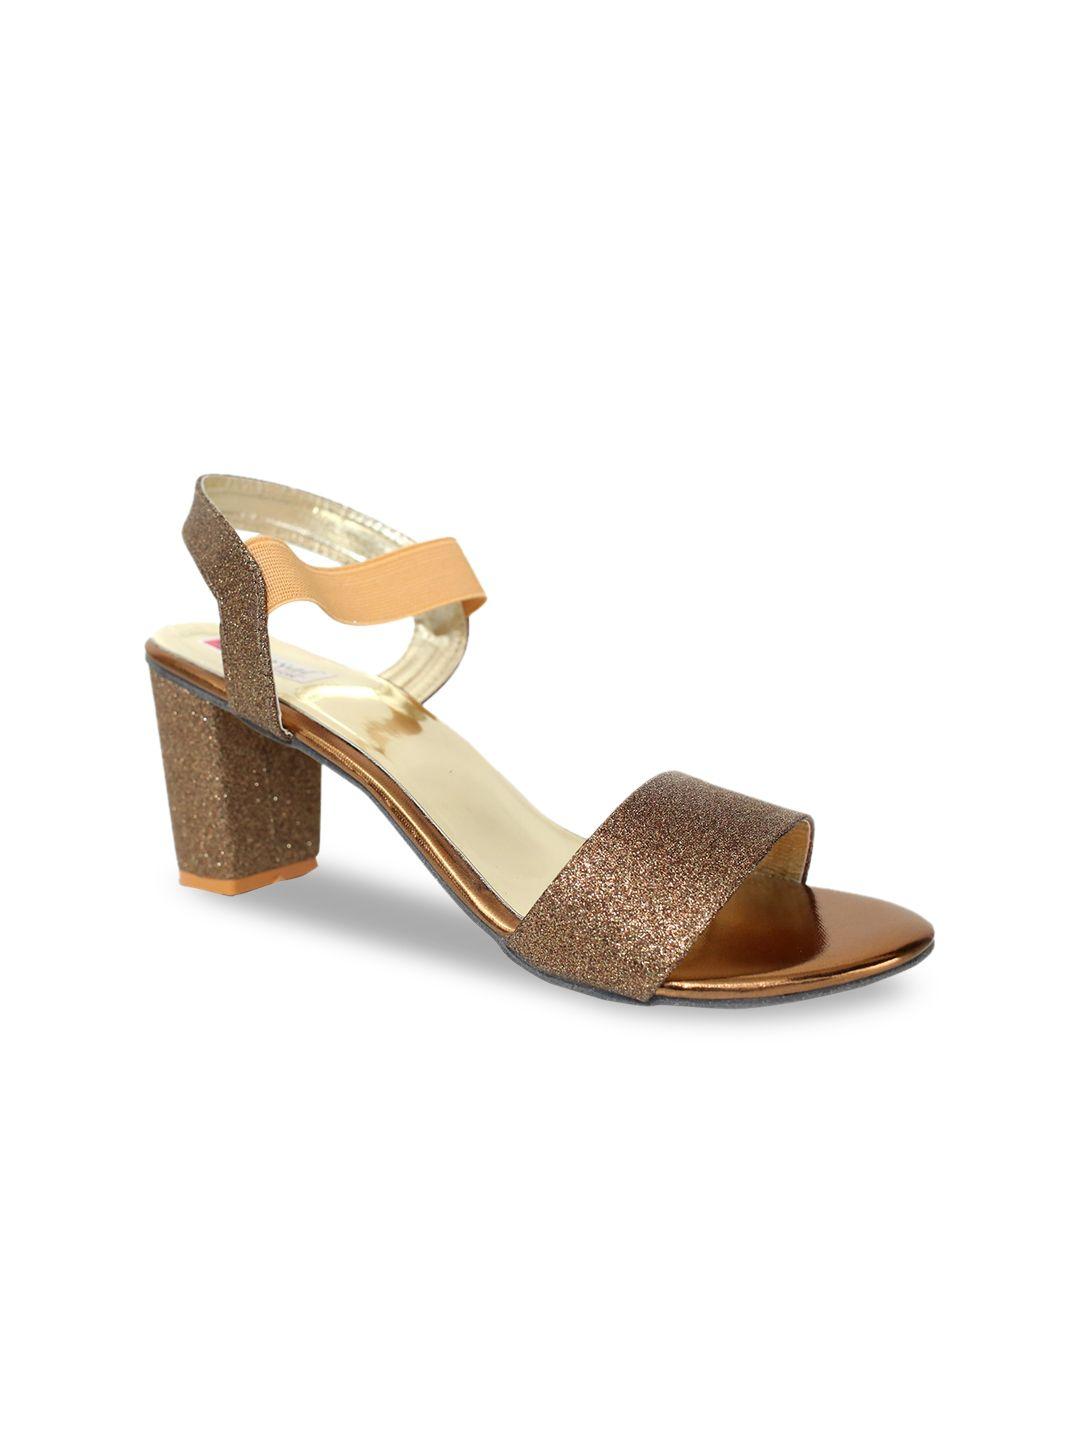 glitzy-galz-copper-toned-textured-block-peep-toes-with-buckles